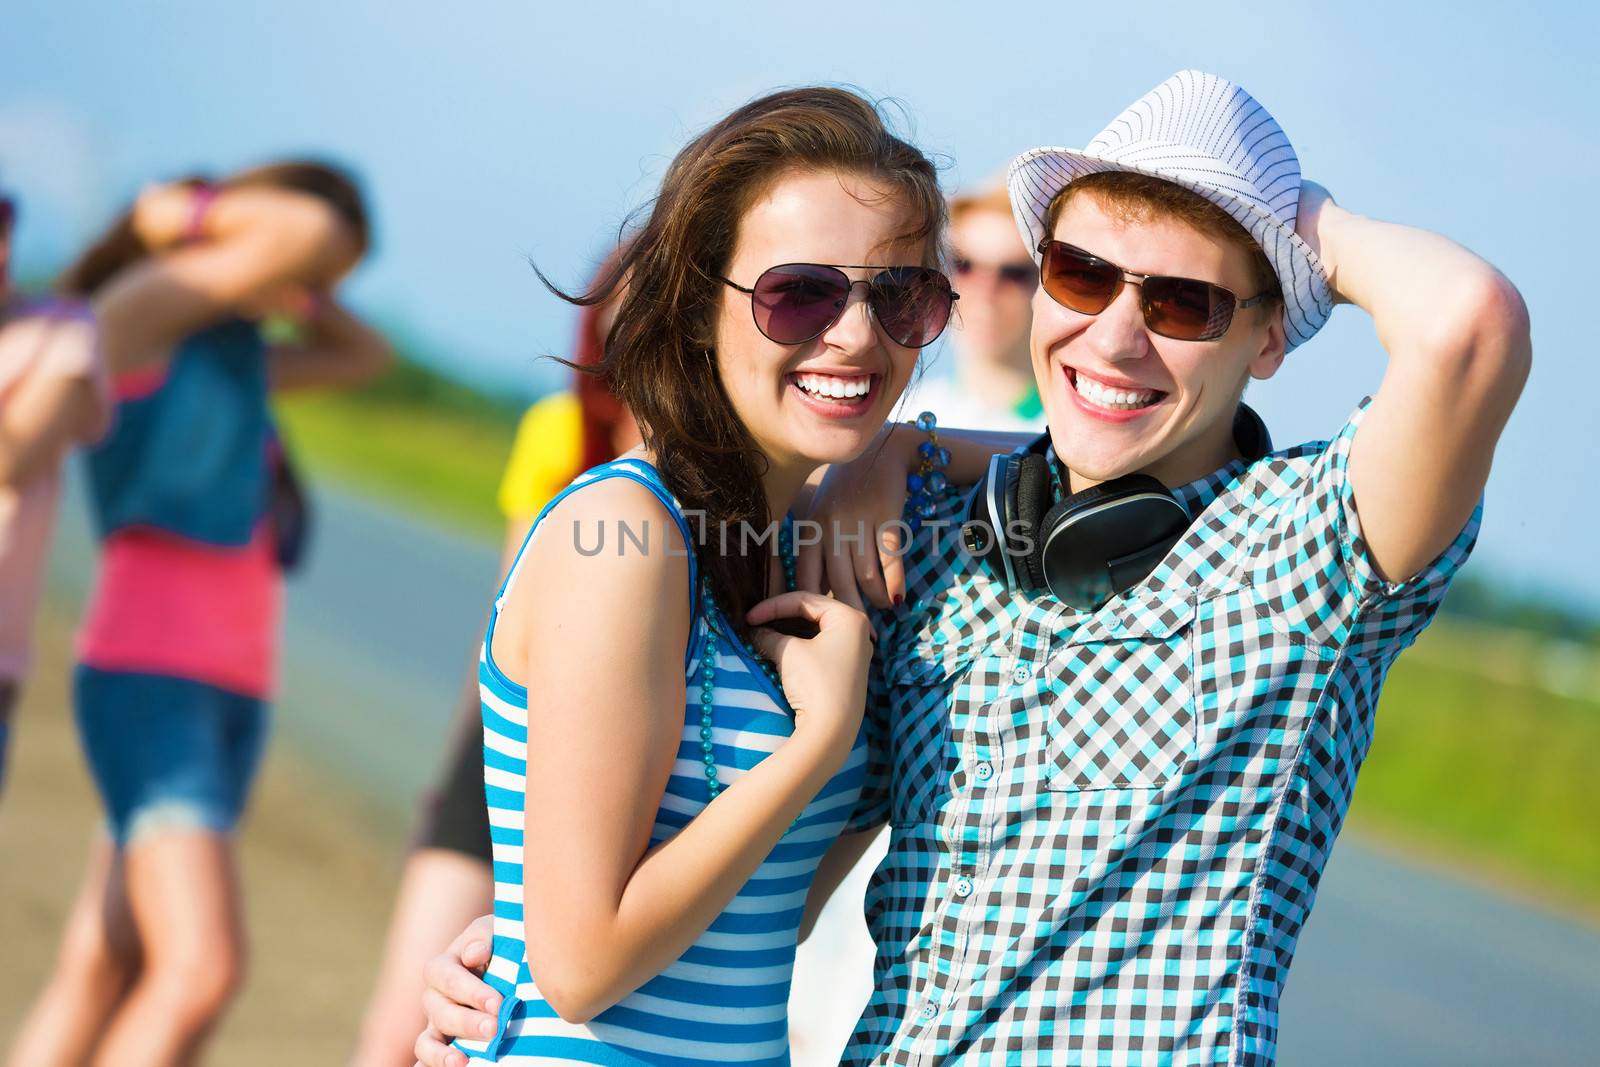 Image of young people having fun outdoors